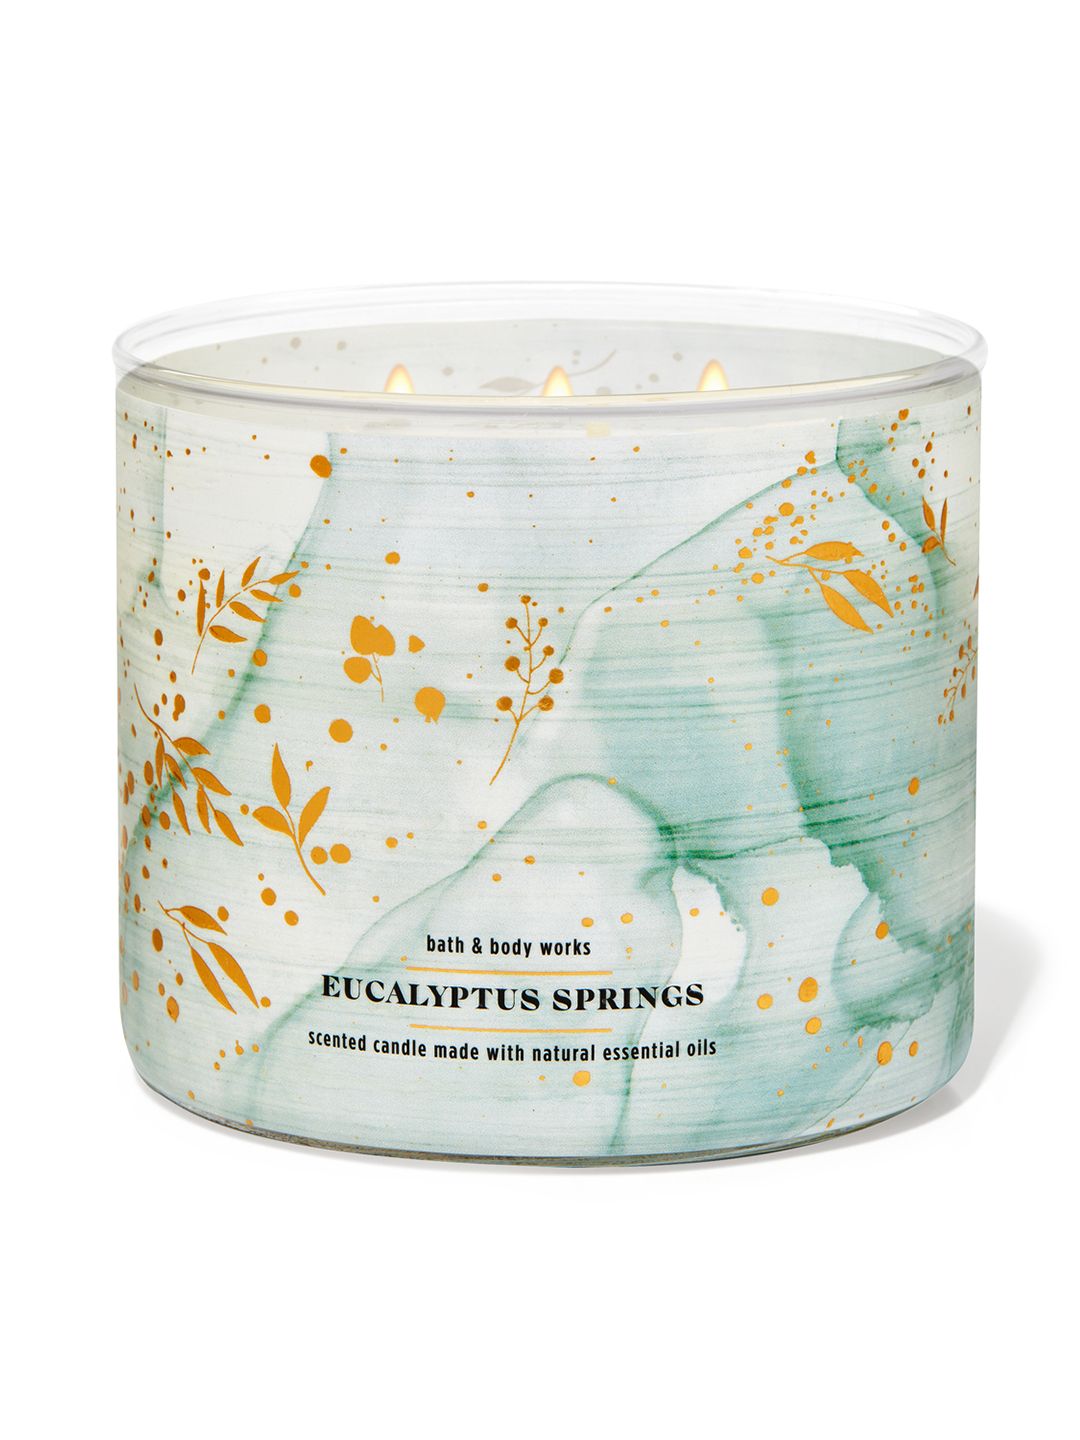 Bath & Body Works Eucalyptus Springs 3-Wick Candle - 411 g Price in India